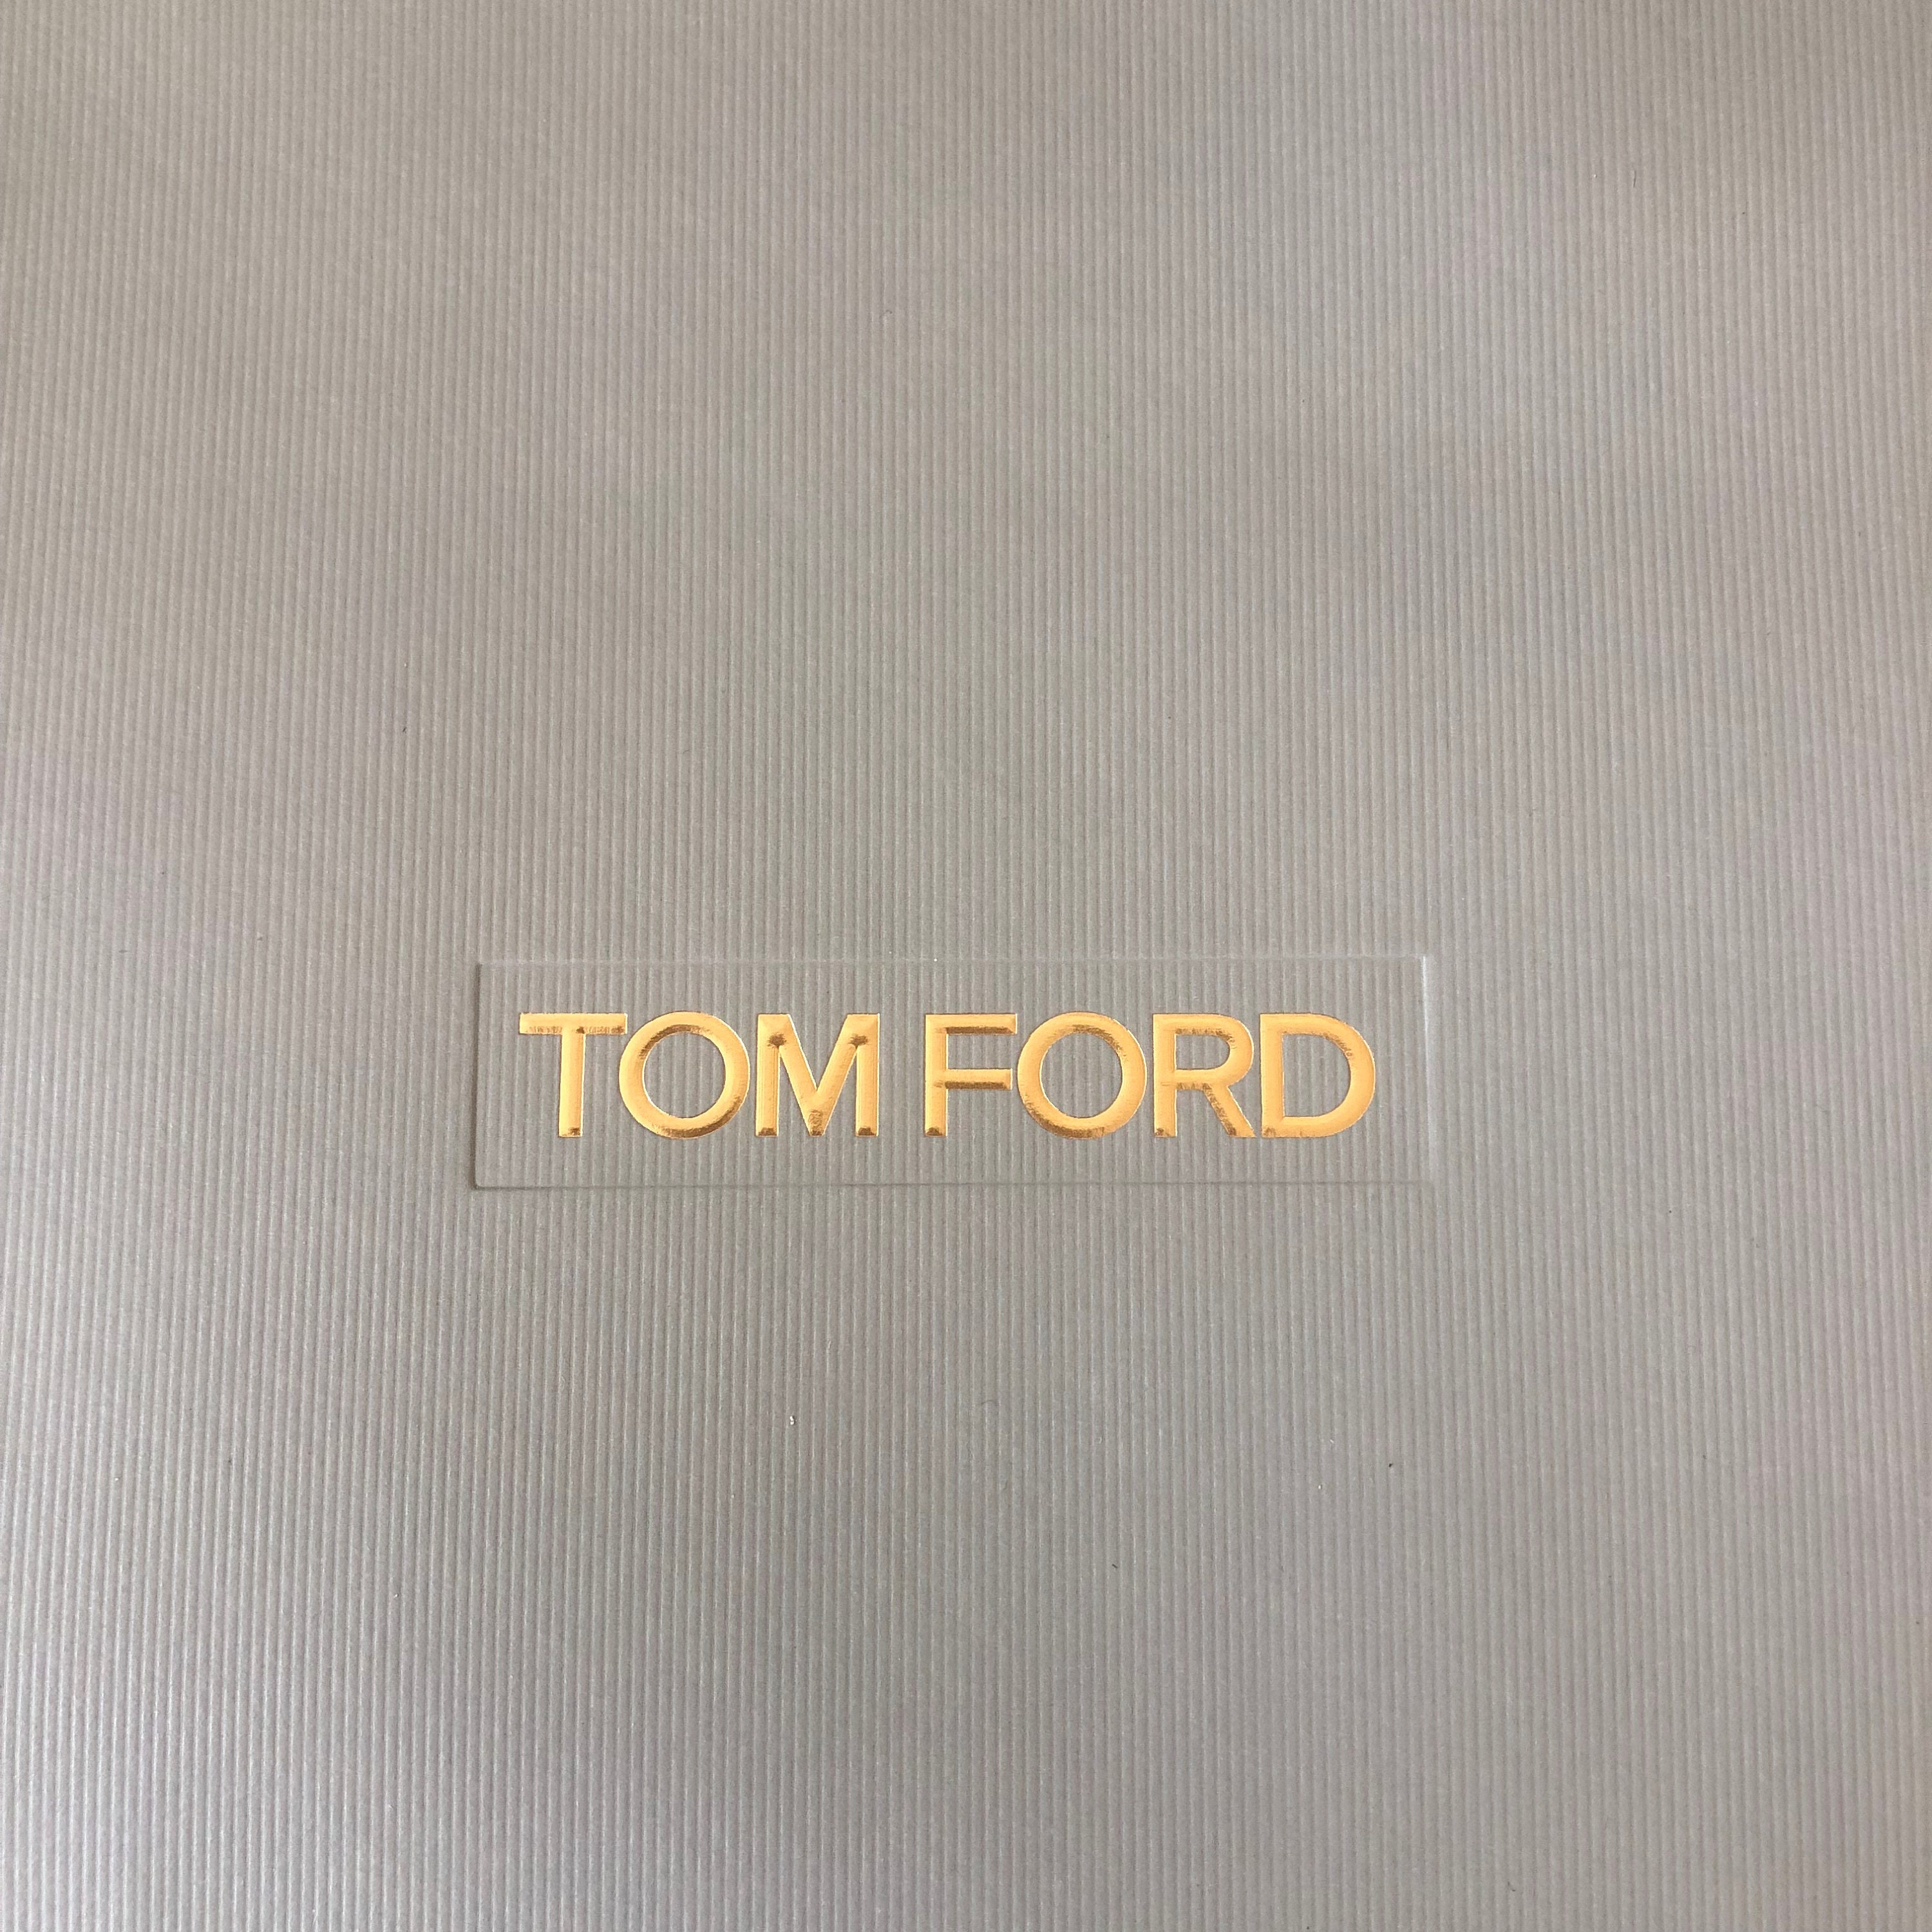 Gucci Tom Ford 2003 Rare Black Leather and Rose Gold Horsebit Bag